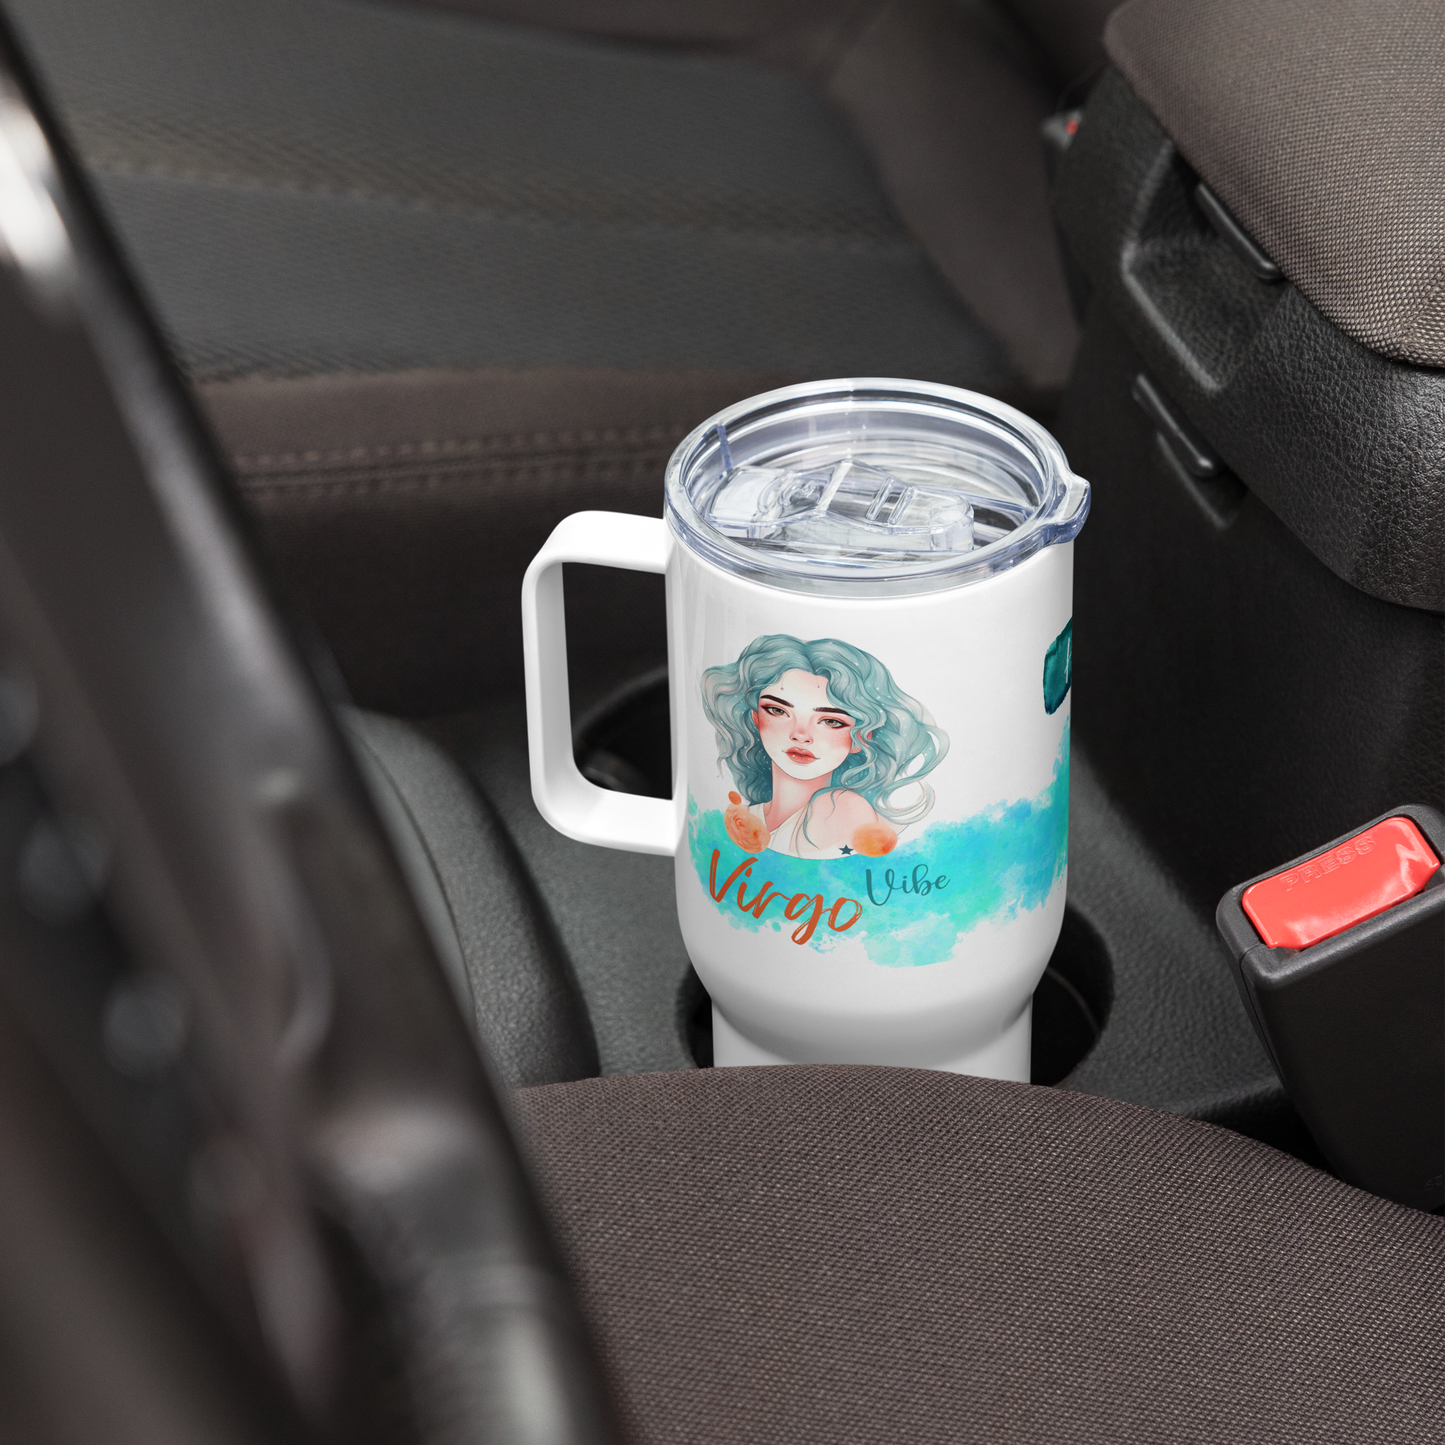 25oz stainless steel travel mug fits most car cup holders, has the words “Virgo Vibe,” and vibrant artwork of a woman with teal colored hair and is personalized with a name.